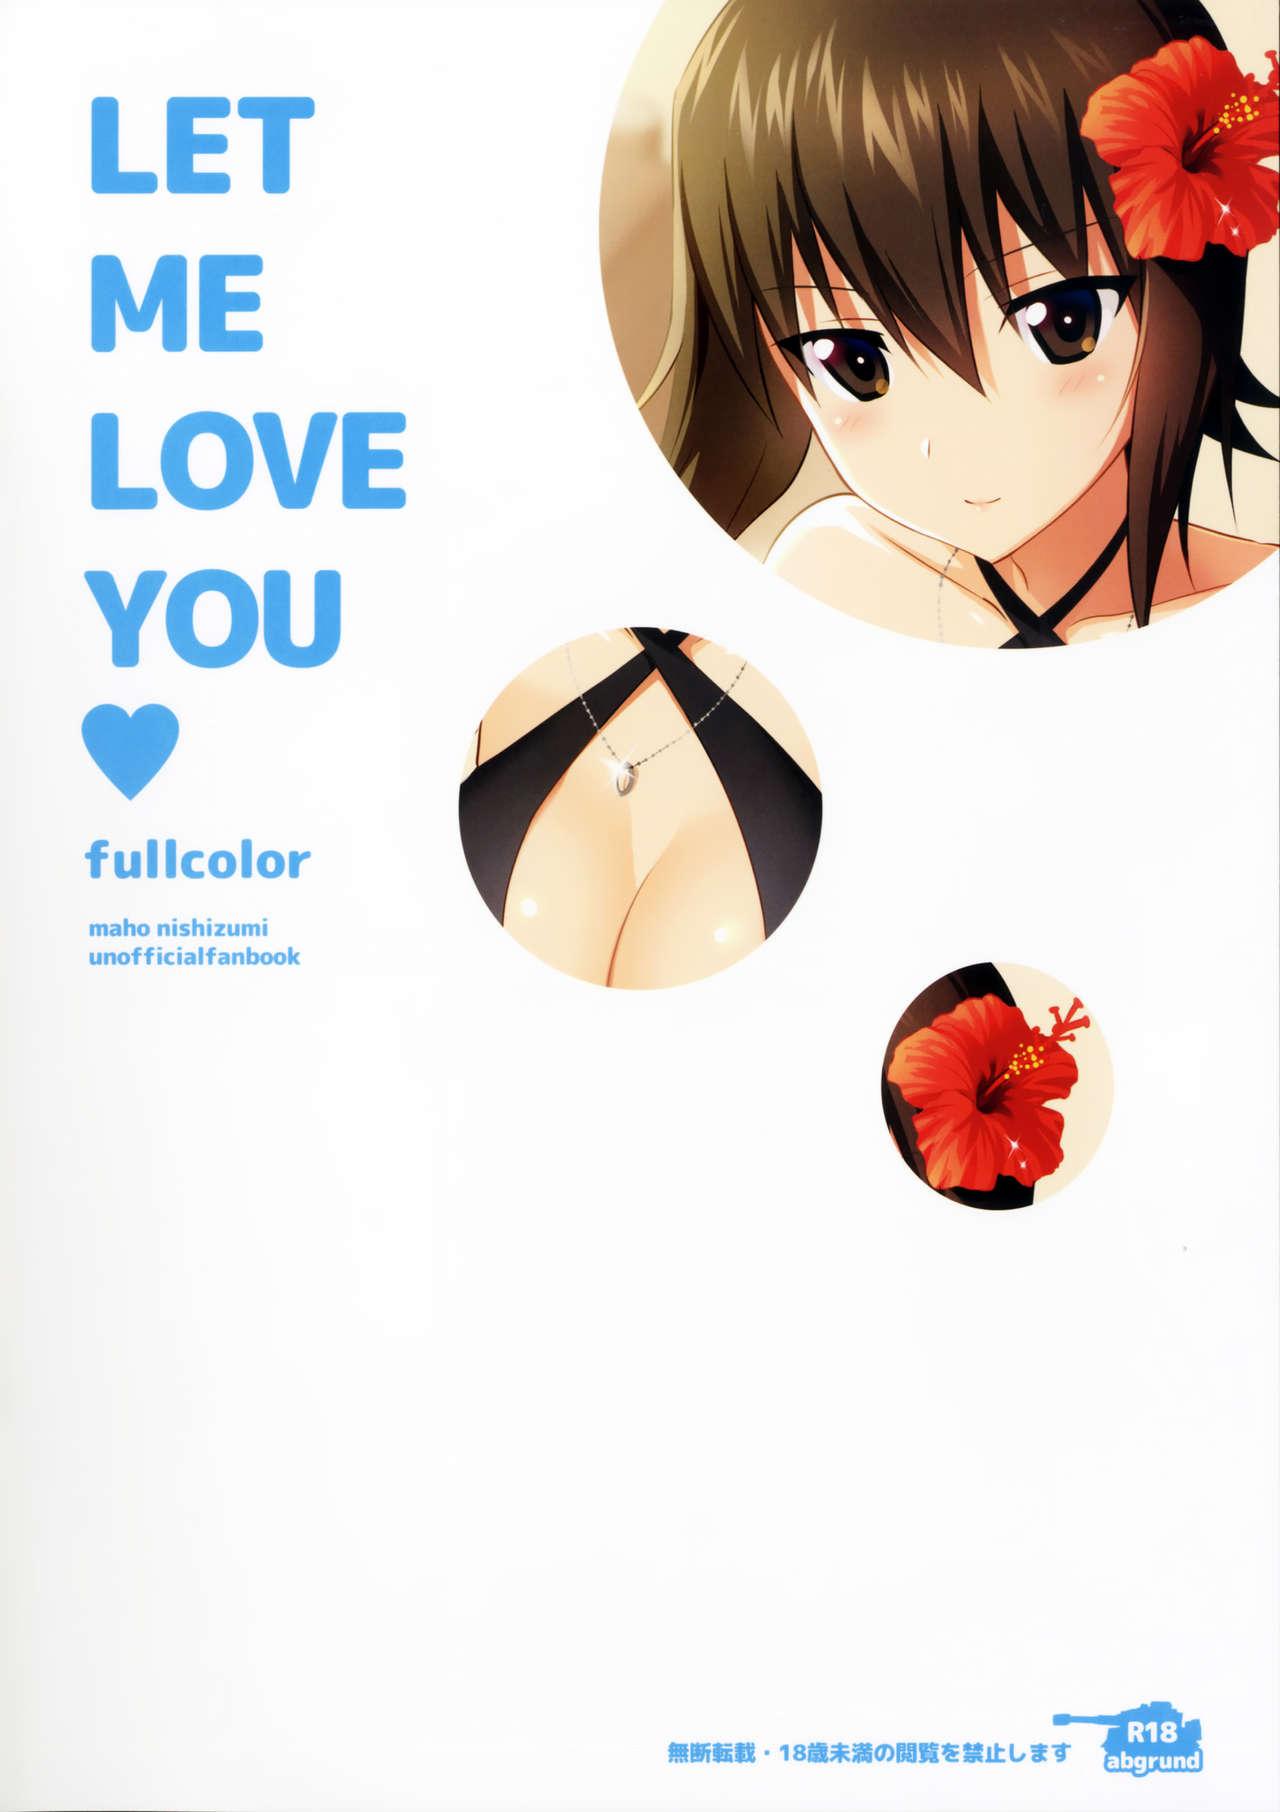 Huge Cock LET ME LOVE YOU fullcolor - Girls und panzer Head - Page 19